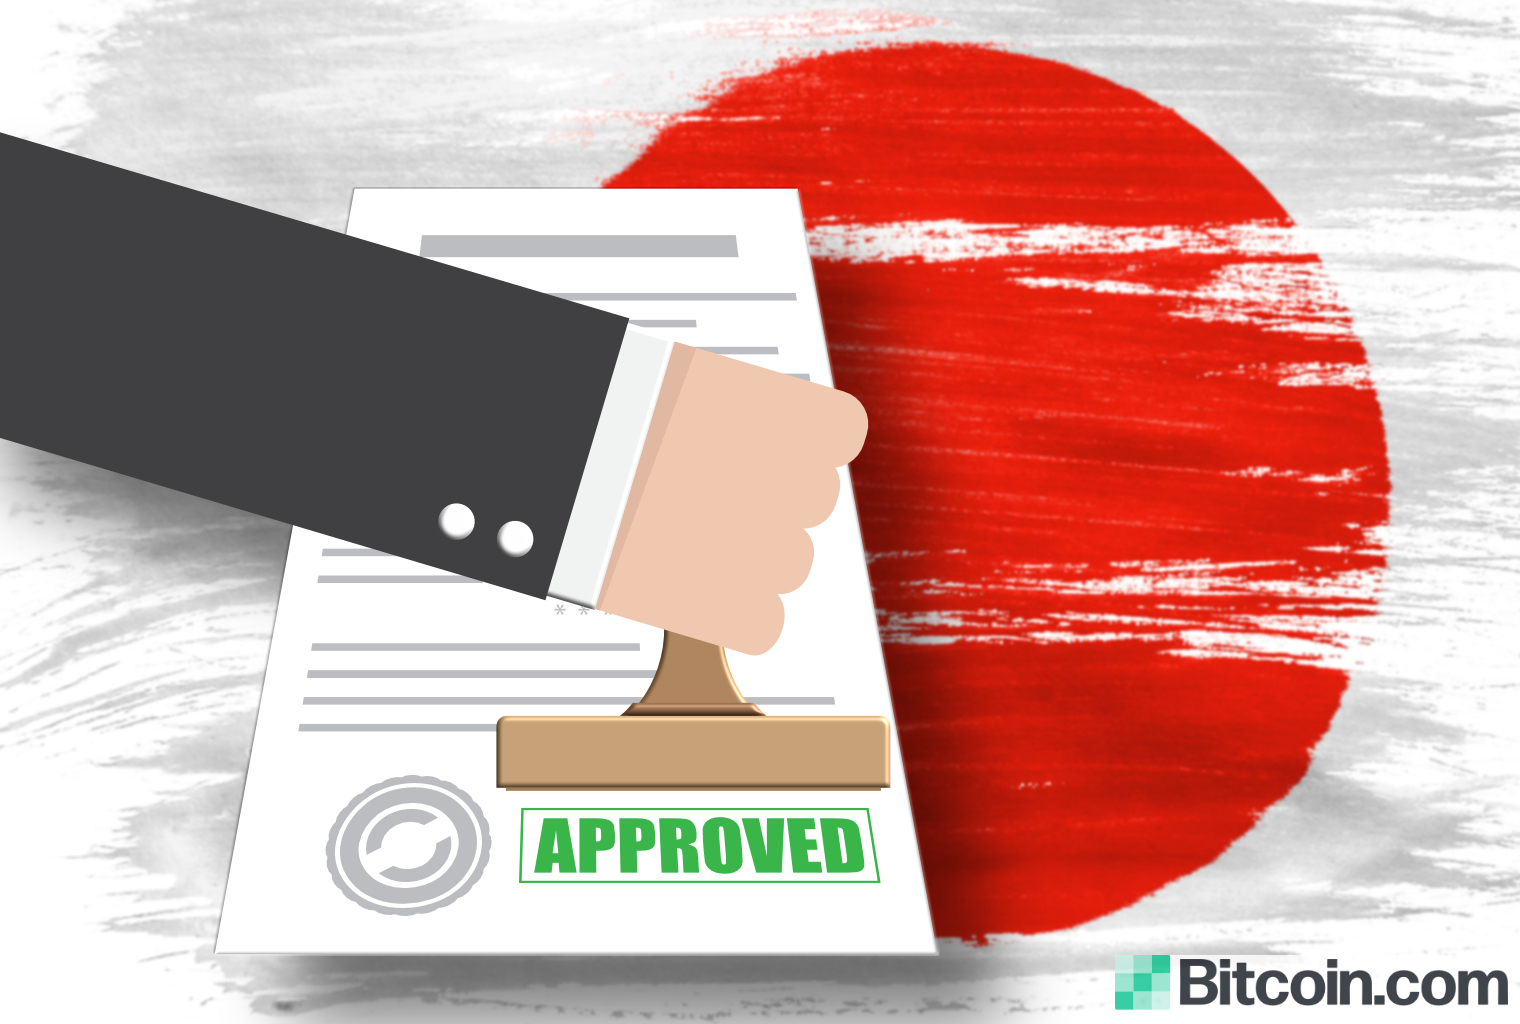 Japan’s Fisco Launching $2.66 Million Cryptocurrency Fund